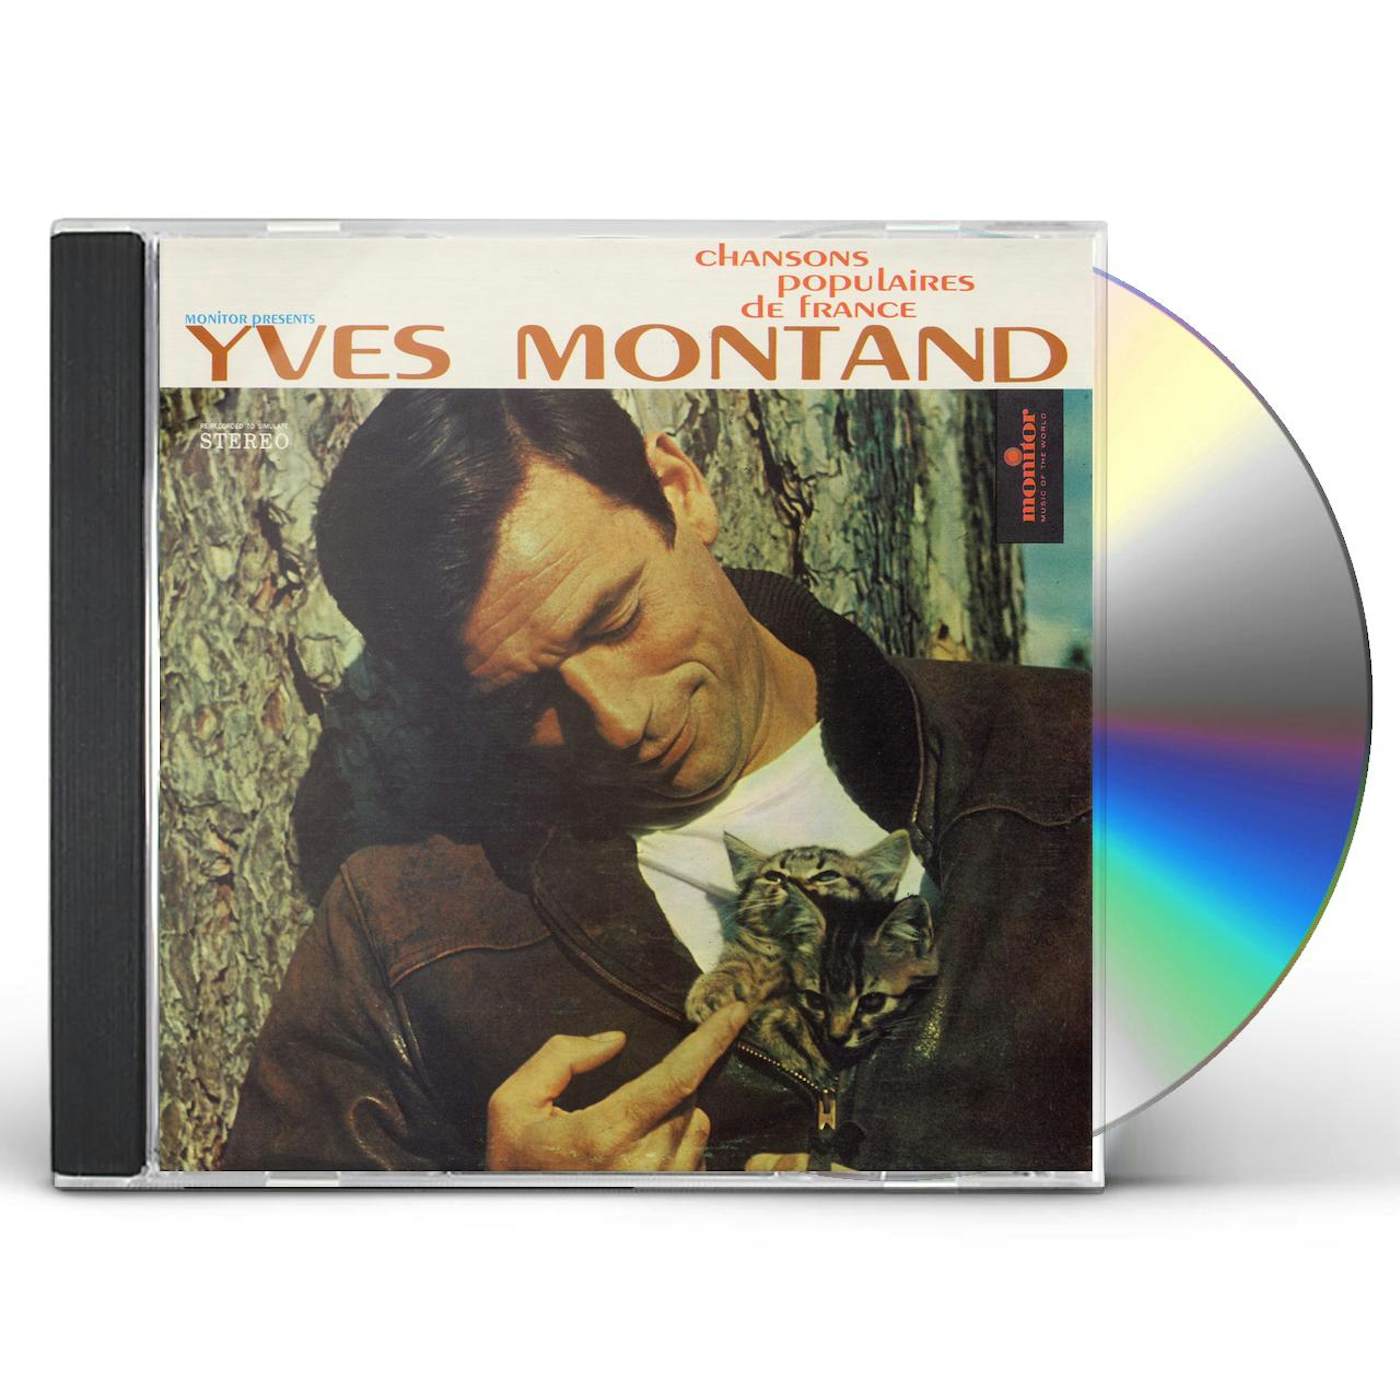 CHANSONS POPULAIRES DE FRANCE: YVES MONTAND CD